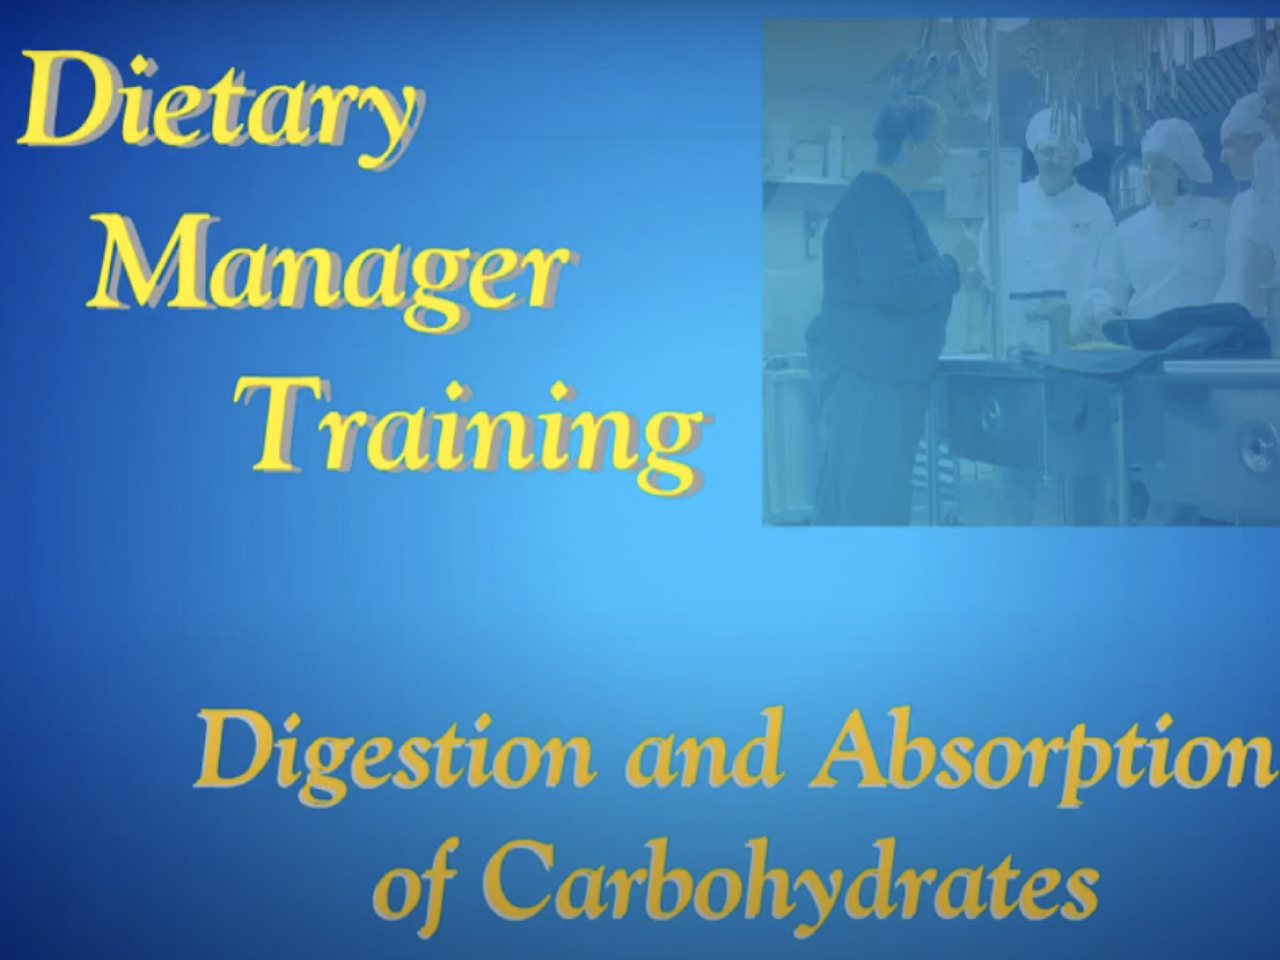 Dietary Manager Training: Digestion and Absorption of Carbohydrates